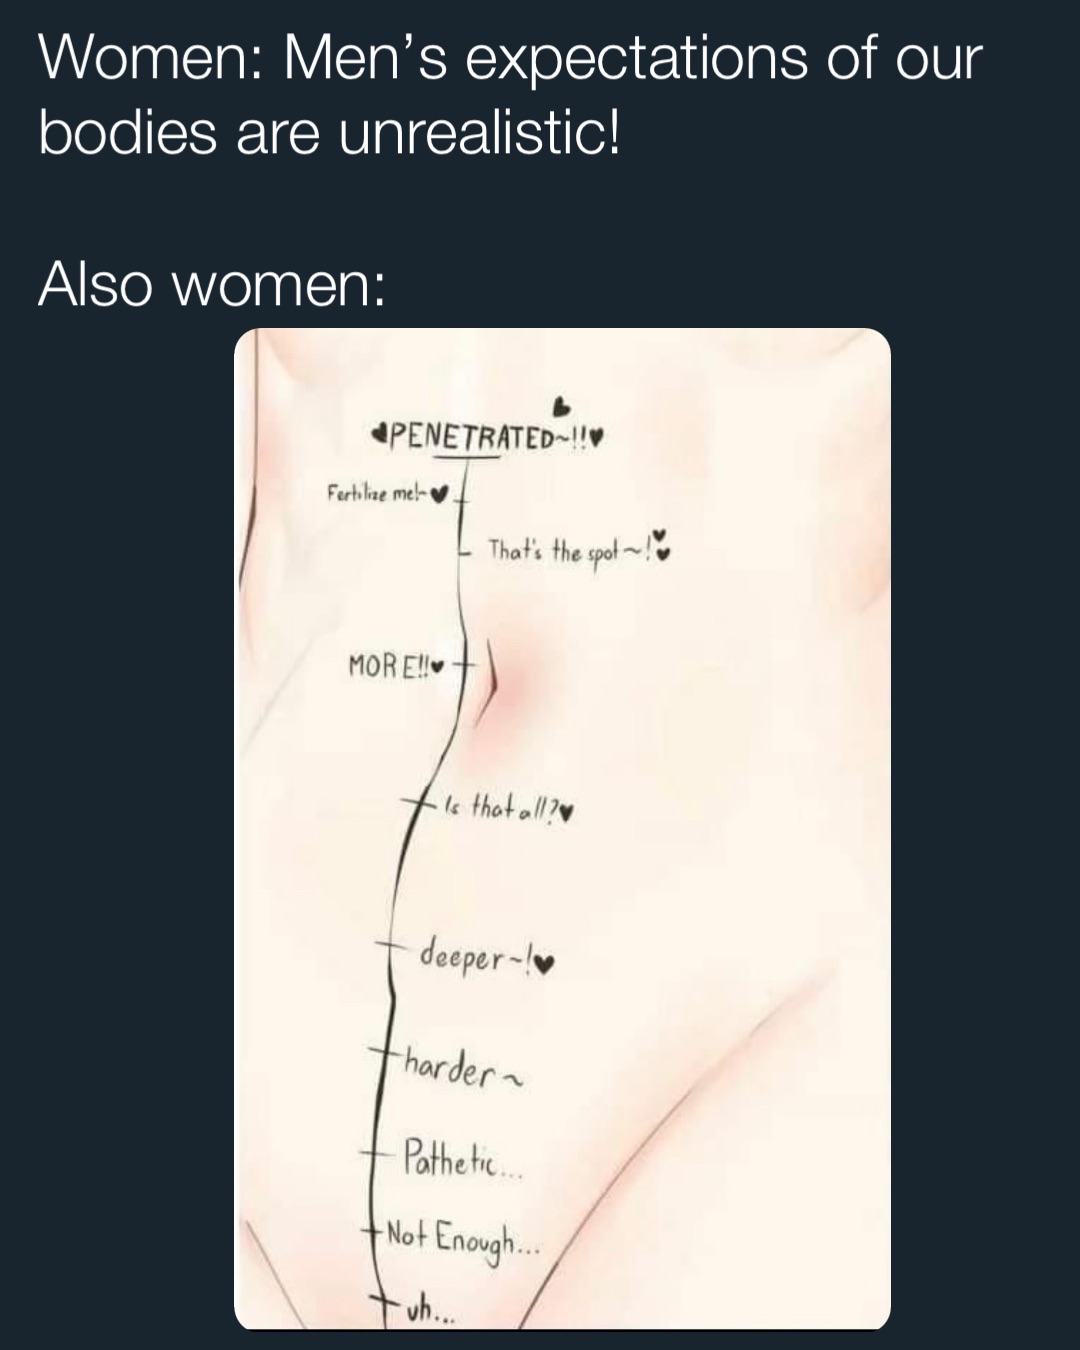 Women: Men’s expectations of our bodies are unrealistic!

Also women: